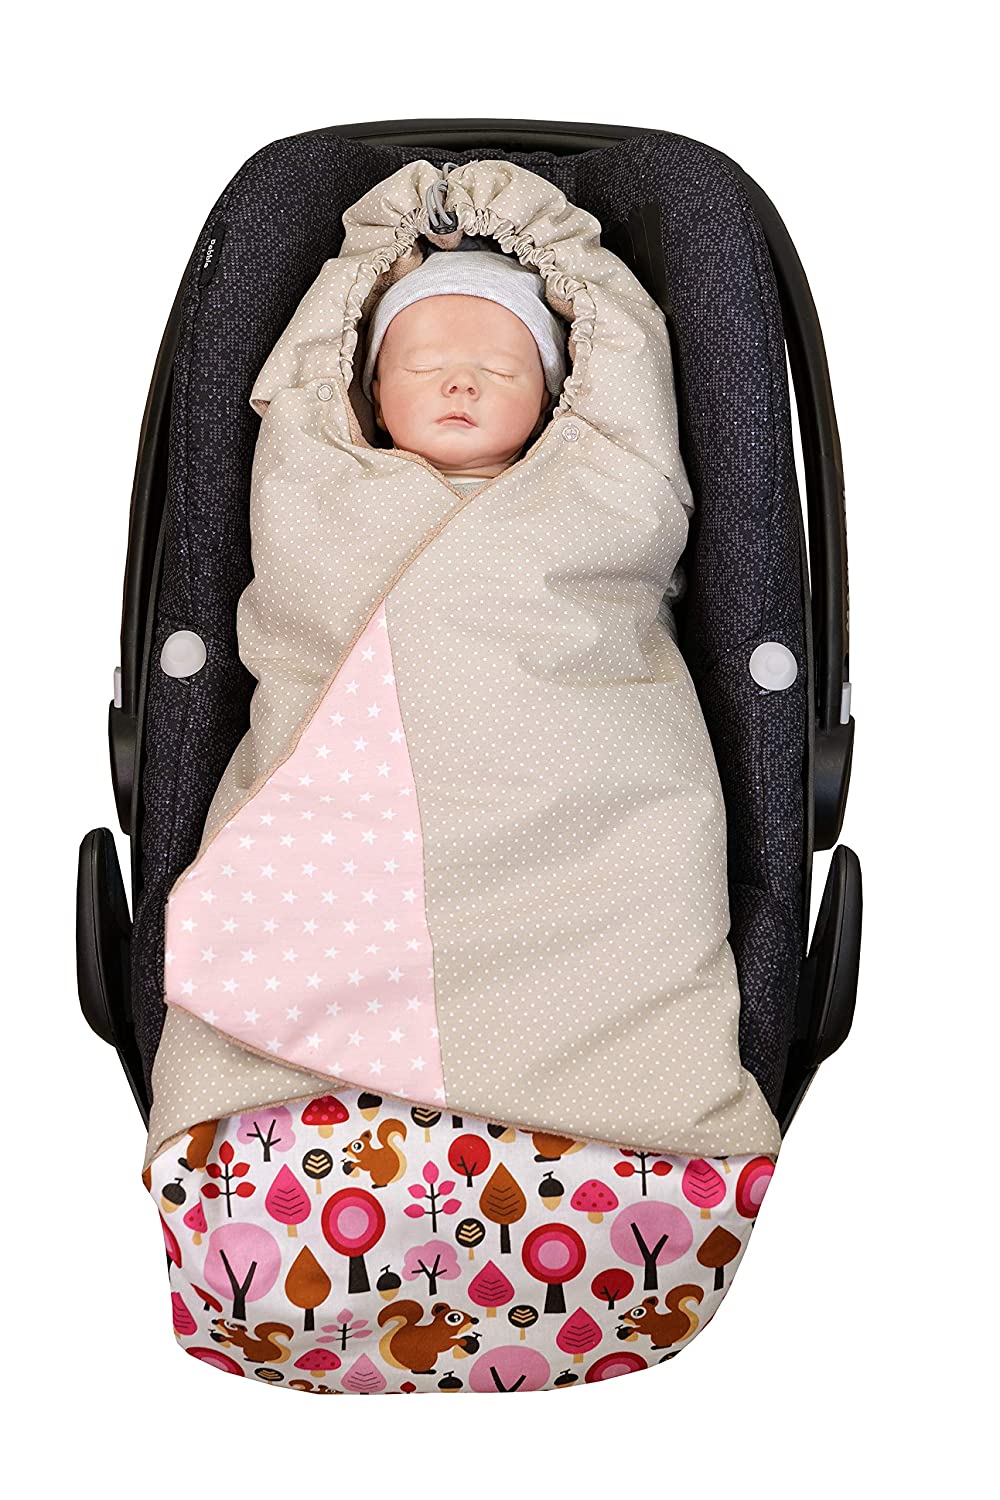 ULLENBOOM ® Swaddling Blanket Baby Seat Sand Squirrel (Made in EU) - Baby Blanket for Car Seat (e.g. Maxi Cosi®), baby bath or pram, ideal blanket for babies (0 to 9 months)